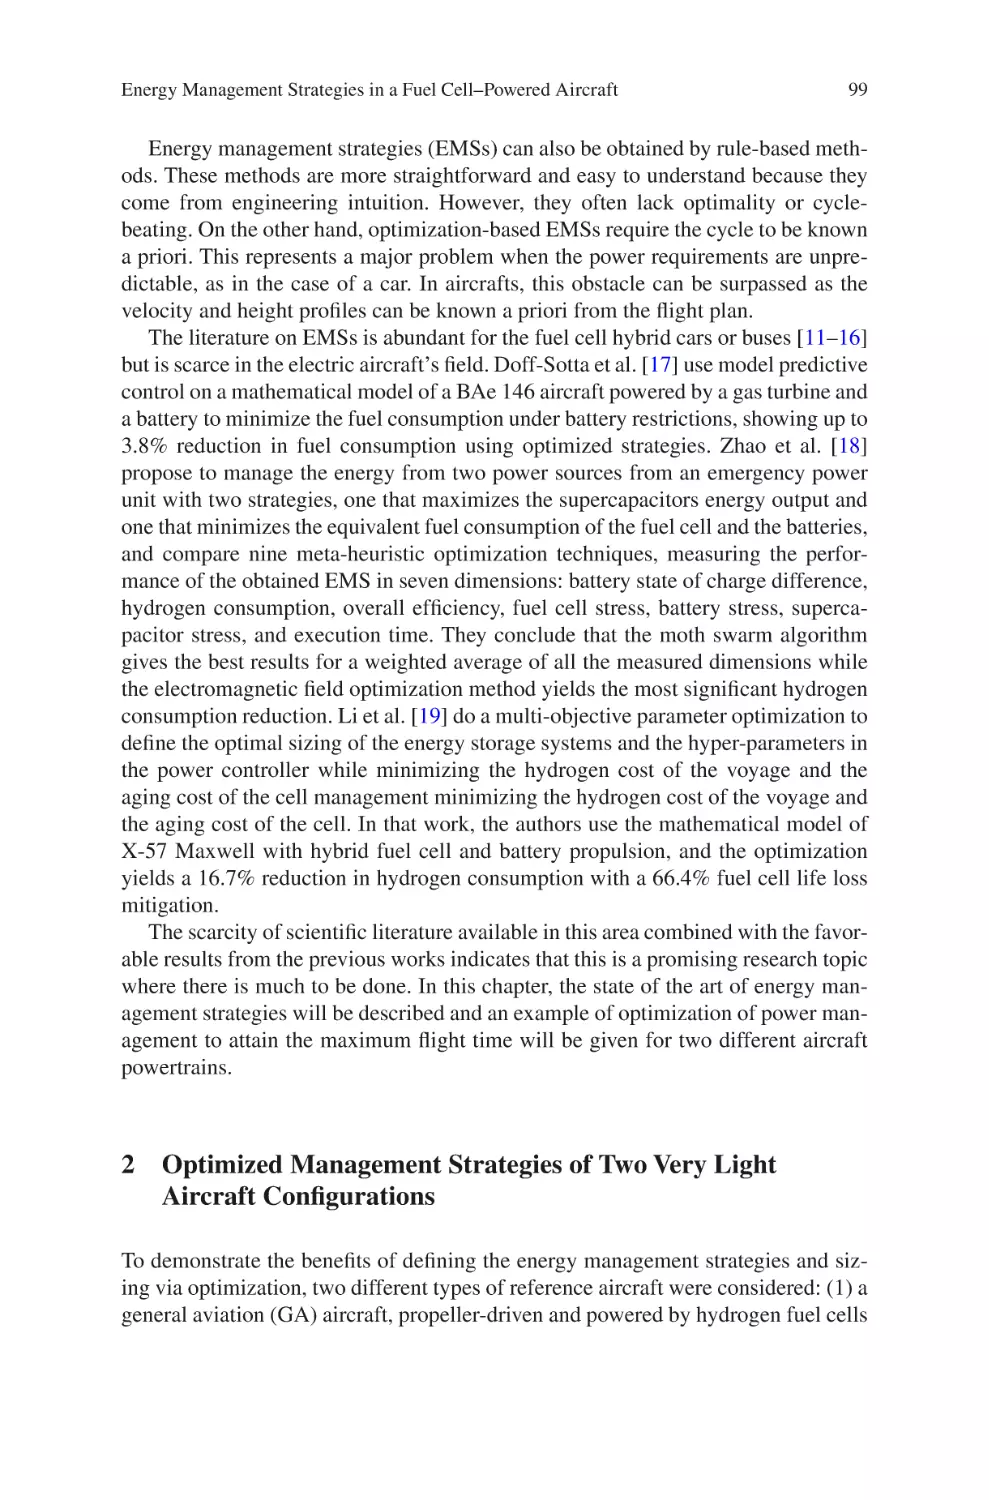 2 Optimized Management Strategies of Two Very Light Aircraft Configurations